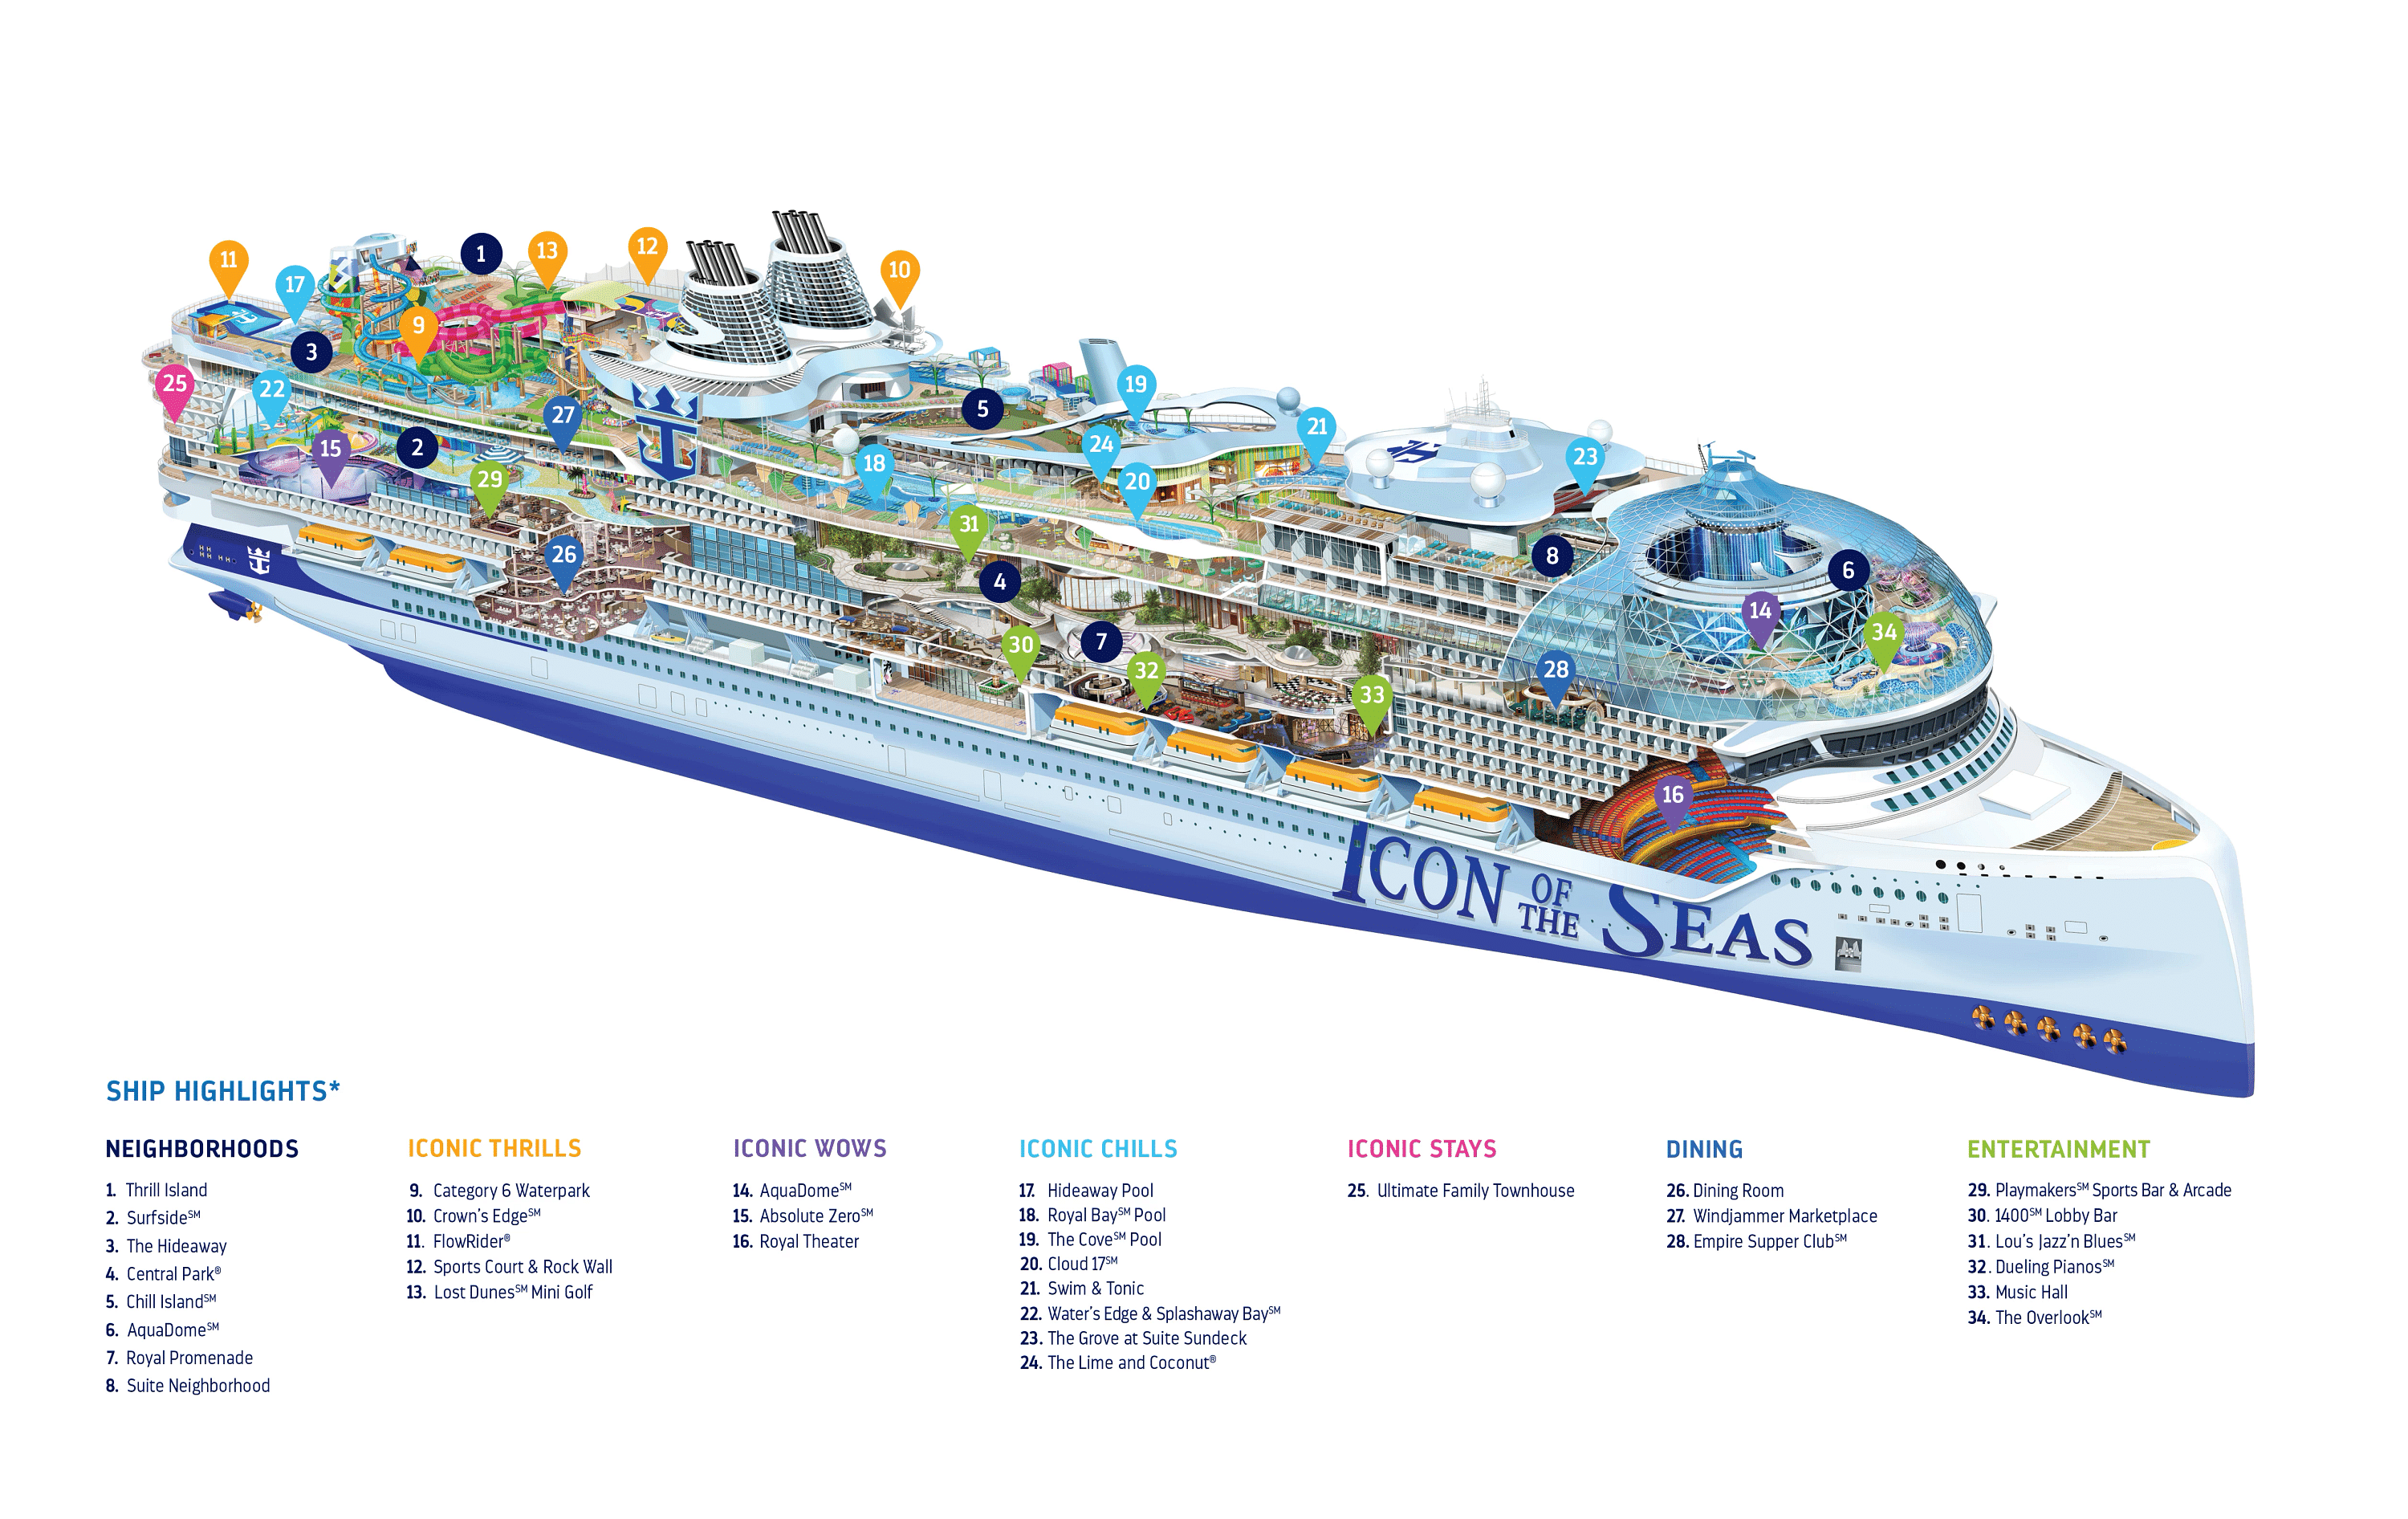 Cruise ship cutaway showing the Icon of the Seas size and amenities 